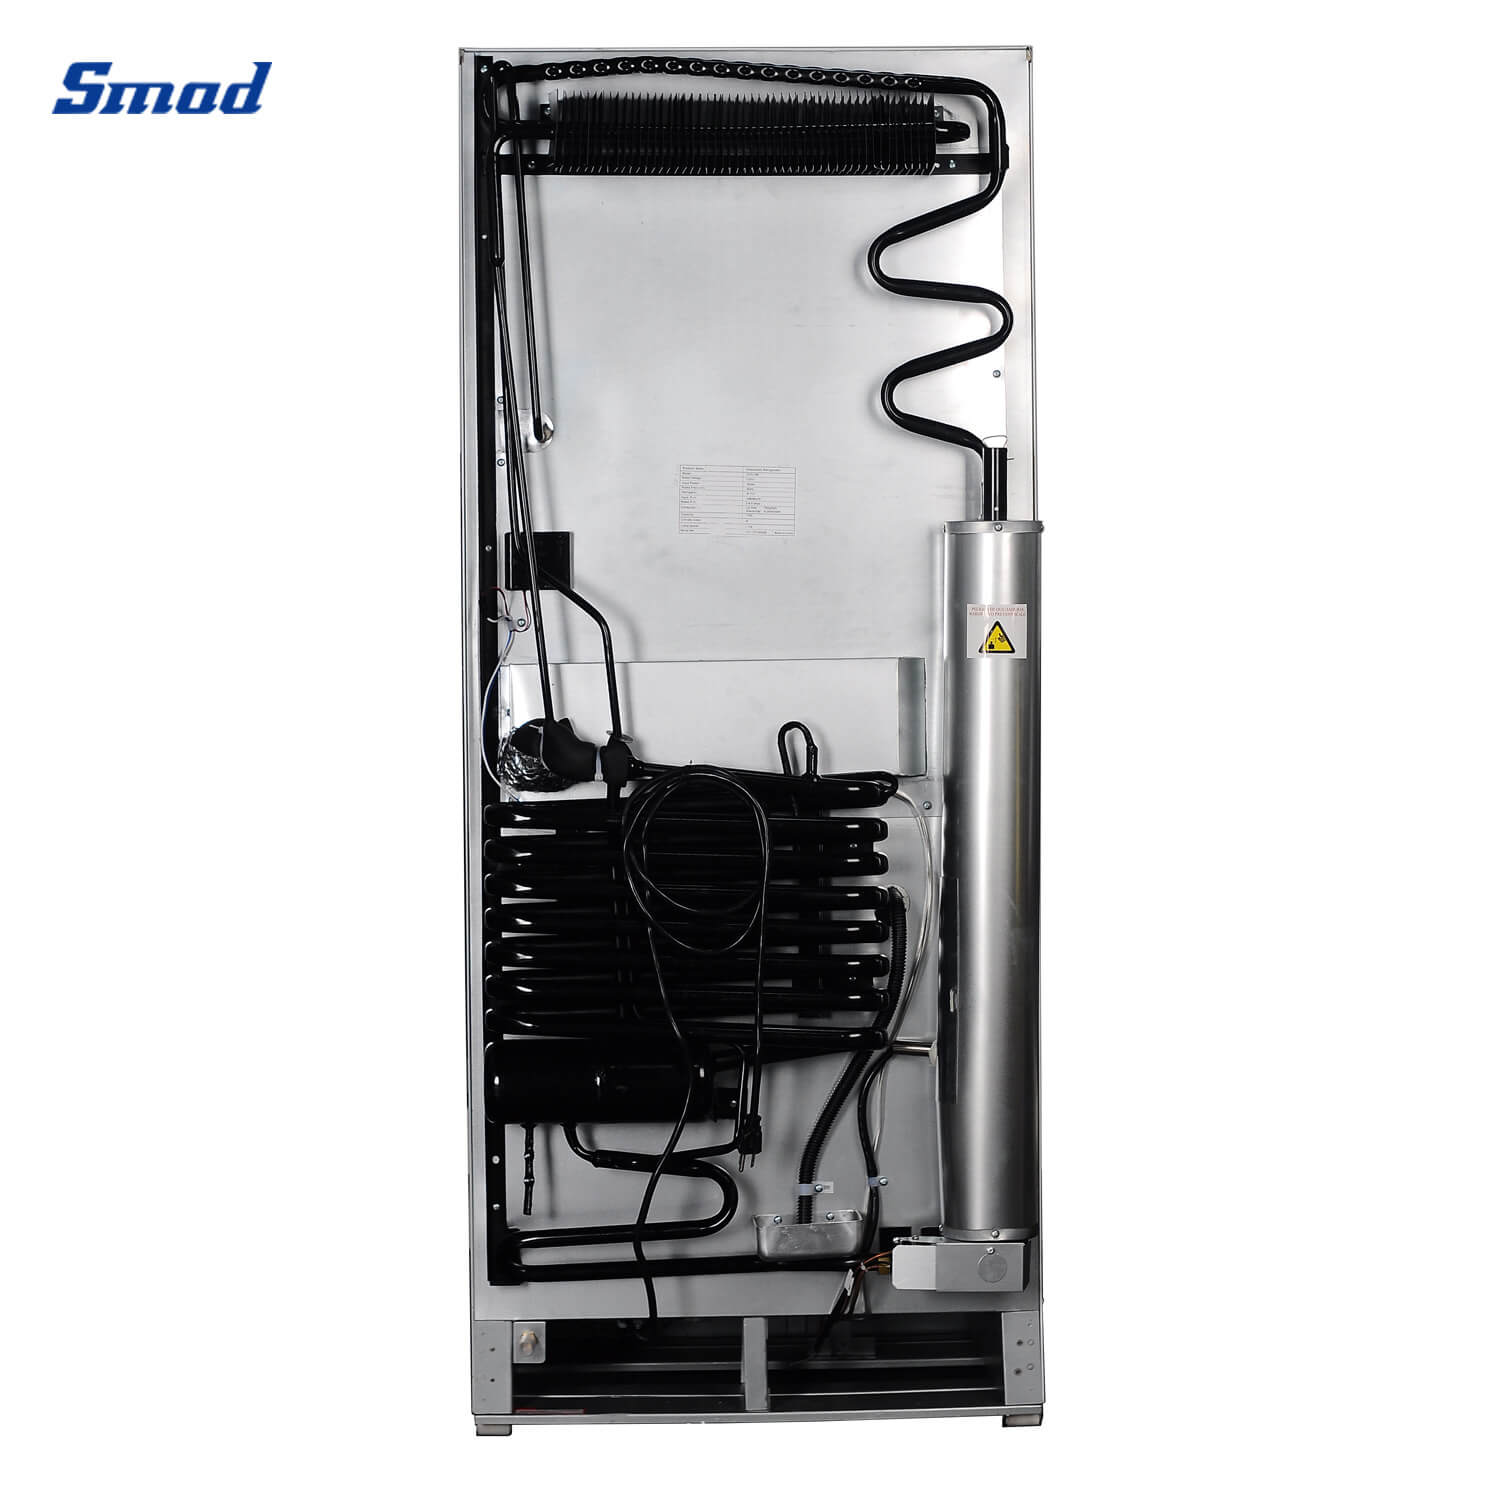 
Smad 275L Top Freezer Absorption Refrigerator with 2-way power supply